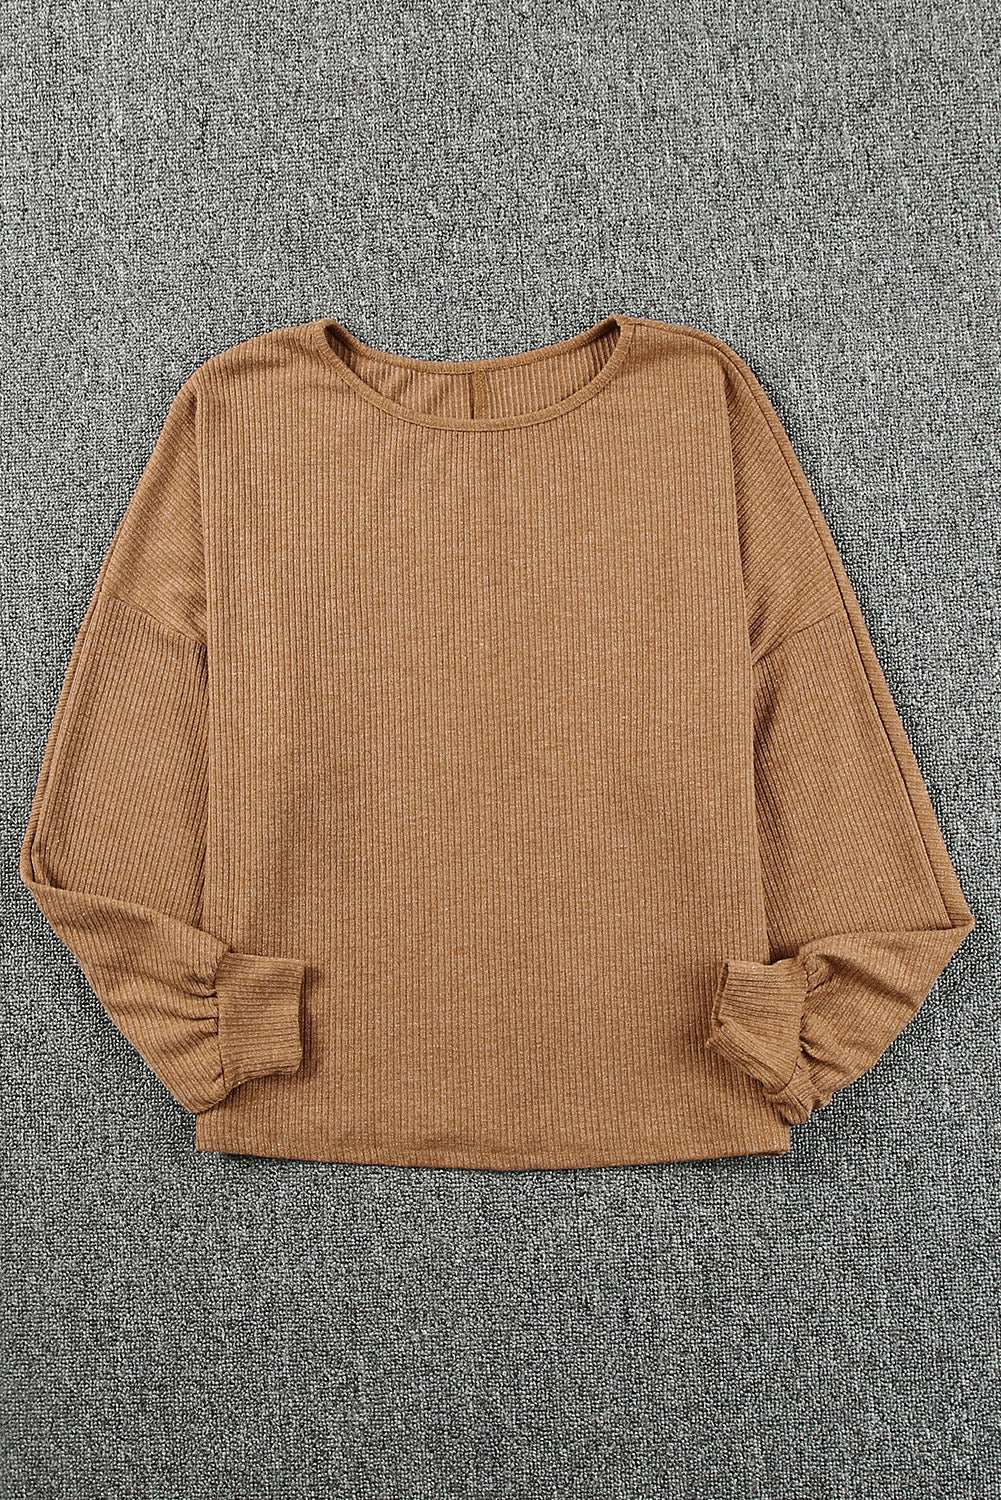 Brown Solid Crew Neck Loose Ribbed Knit Top